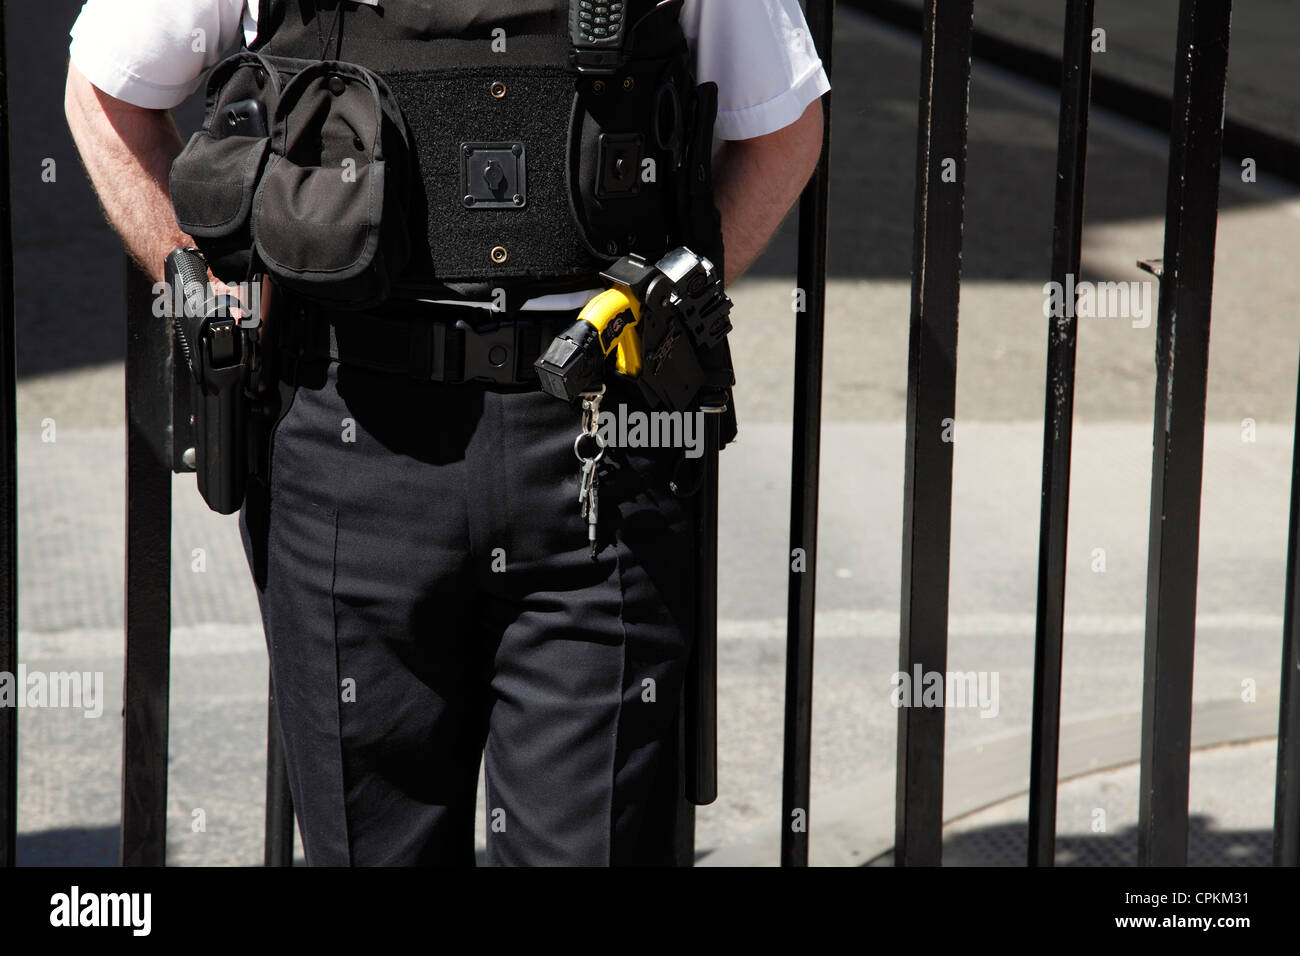 An armed Metropolitan police officer at Downing Street, Westminster, London, England, U.K. Stock Photo